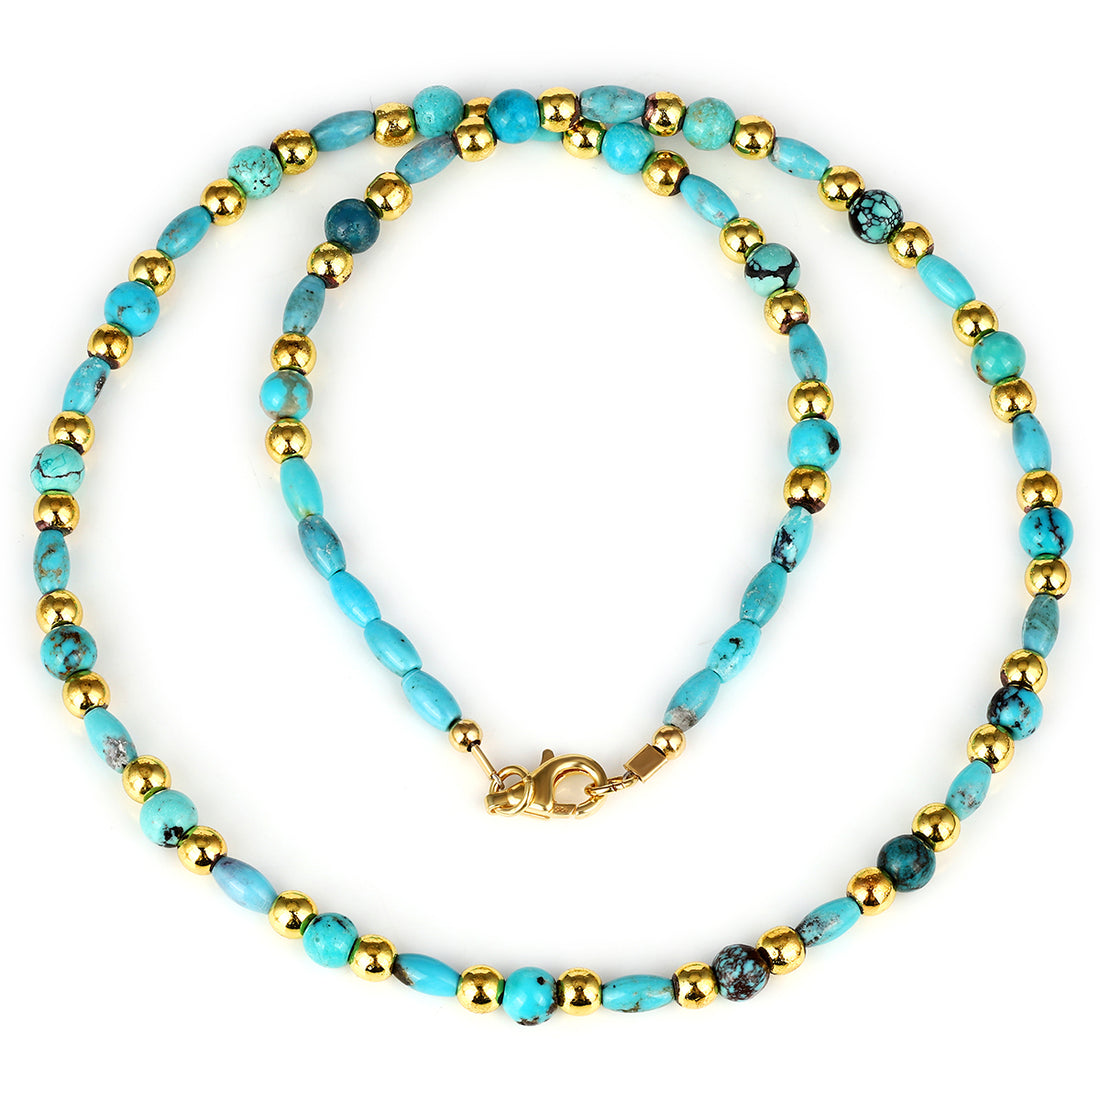 Turquoise and Hematite Choker Necklace